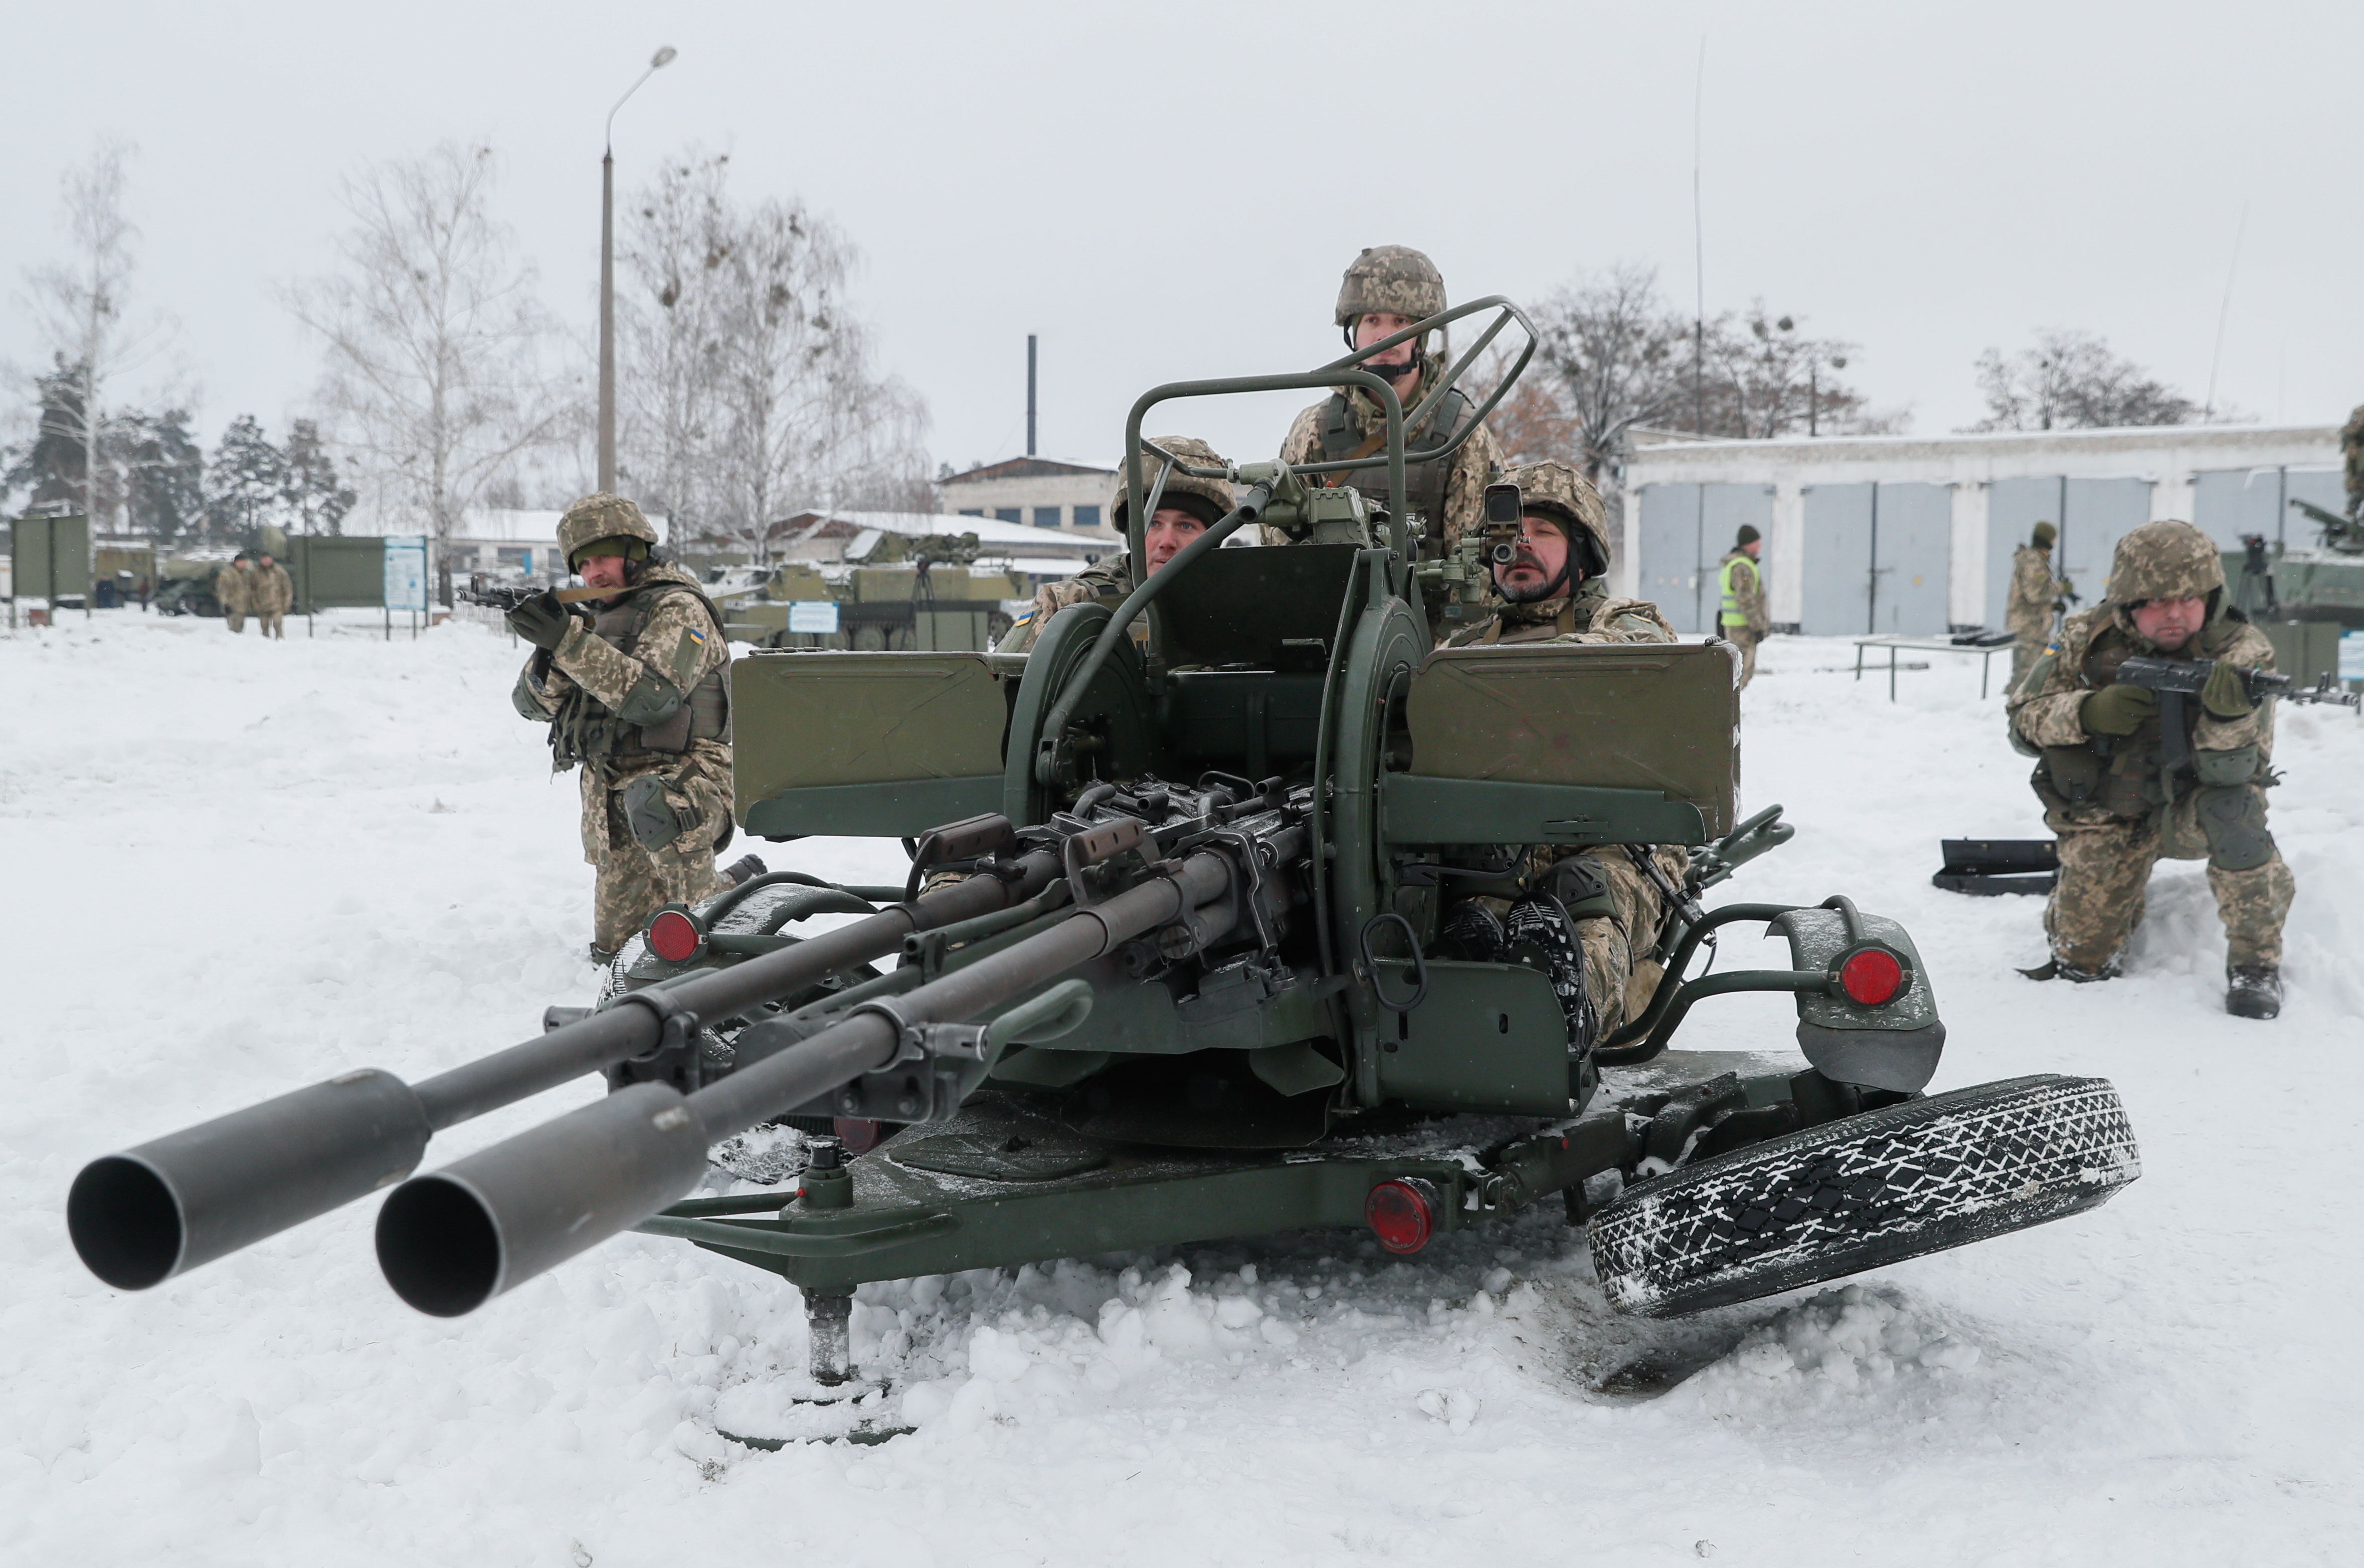 epa07240130 Ukrainian reservists operate an anti-aircraft duplex gun, during their training on the Desna shooting range in Chernihiv region about 120 km from capital Kiev, Ukraine, 19 December 2018. The large-scale military and reservists training started in Ukraine after martial law was imposed in 10 regions of Ukraine at the end of November 2018. The martial law in Ukraine will not be prolonged after the expiration of its 30-day period on December 26, if there is no full-scale Russian armed aggression as President Poroshenko said during his press conference on 16 December 2018.  EPA/SERGEY DOLZHENKO